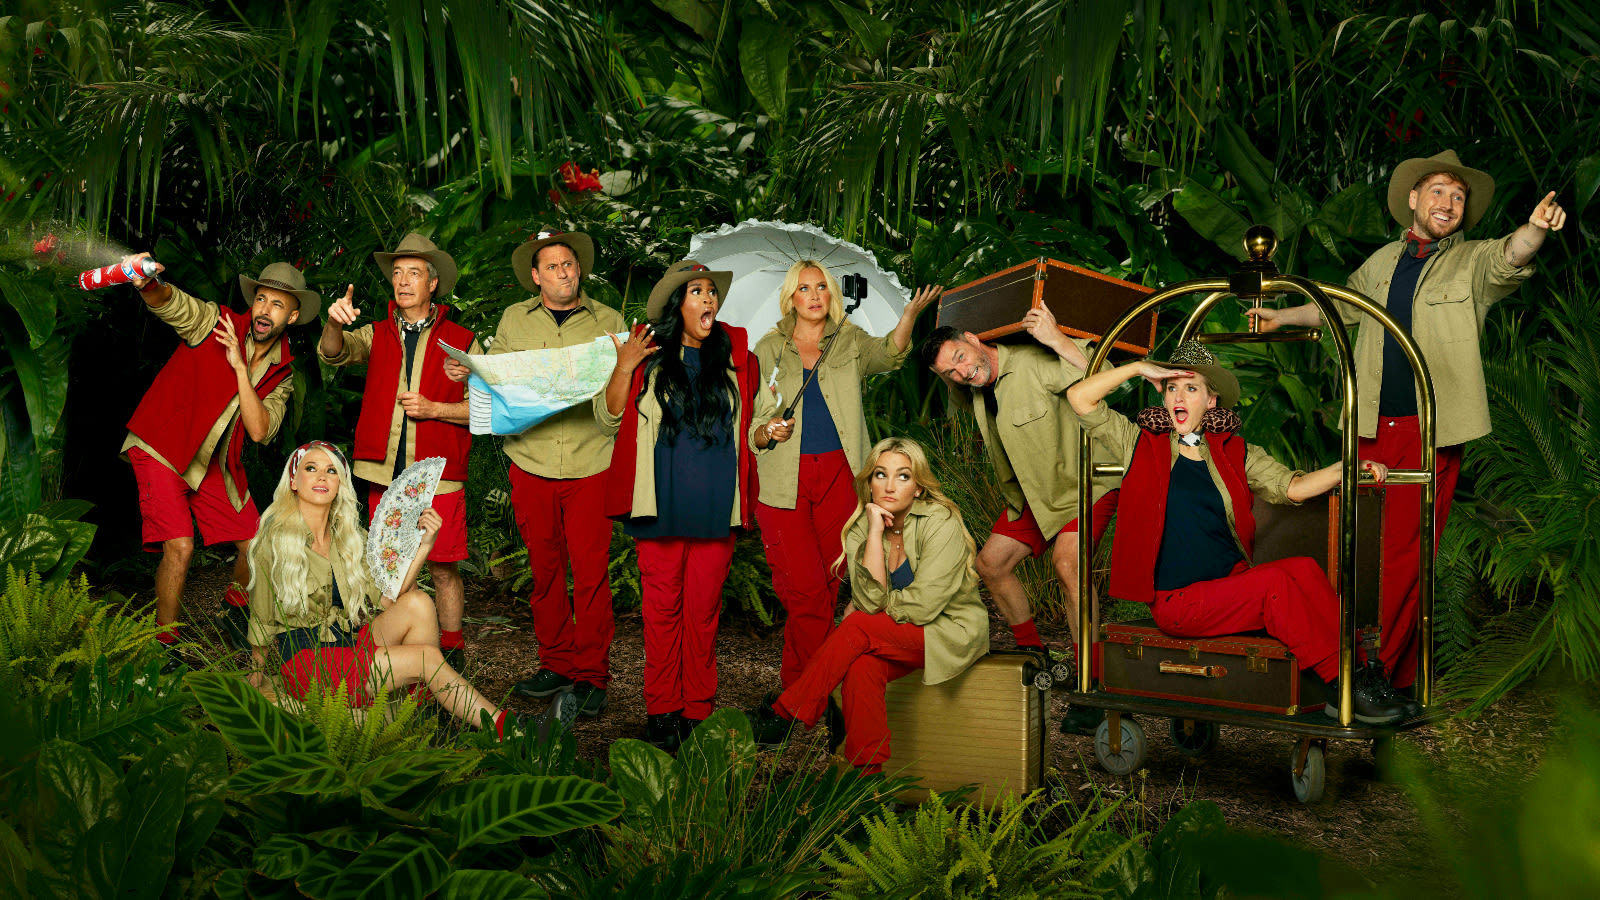 Current lineup of 'I'm A Celebrity Get Me Out of Here' contestants, featuring Nella Rose Brand Controversy Management, in red and beige, posing playfully in a jungle setting.